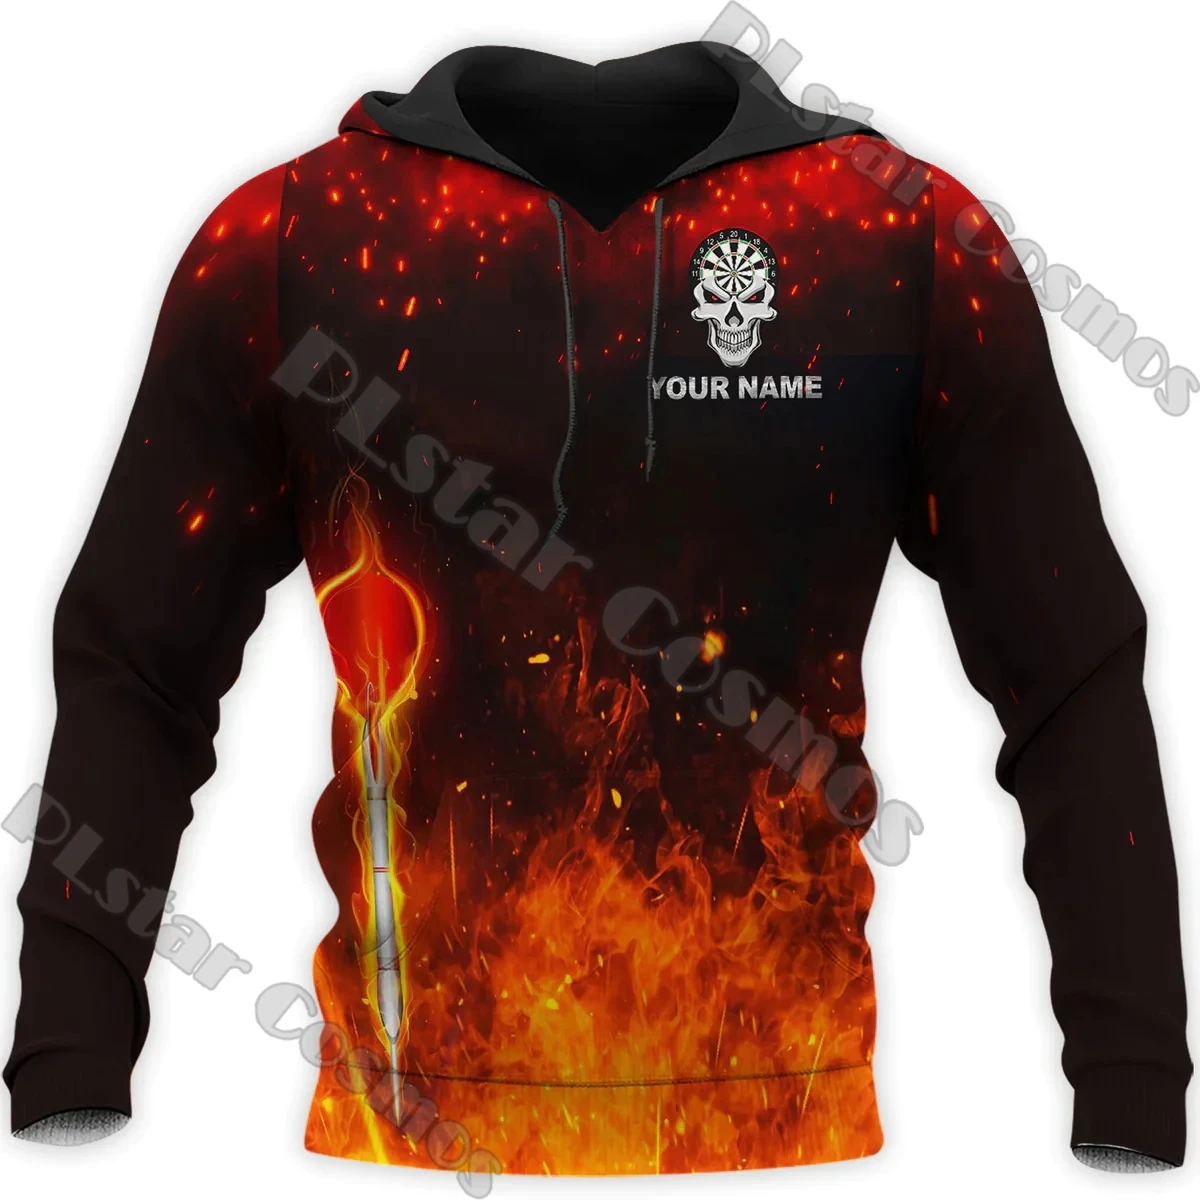 

Personalized Name Darts player 3D Full Printed Fashion Men's hoodies Unisex Casual zipper pullover Gift For Dart Lover TDD164